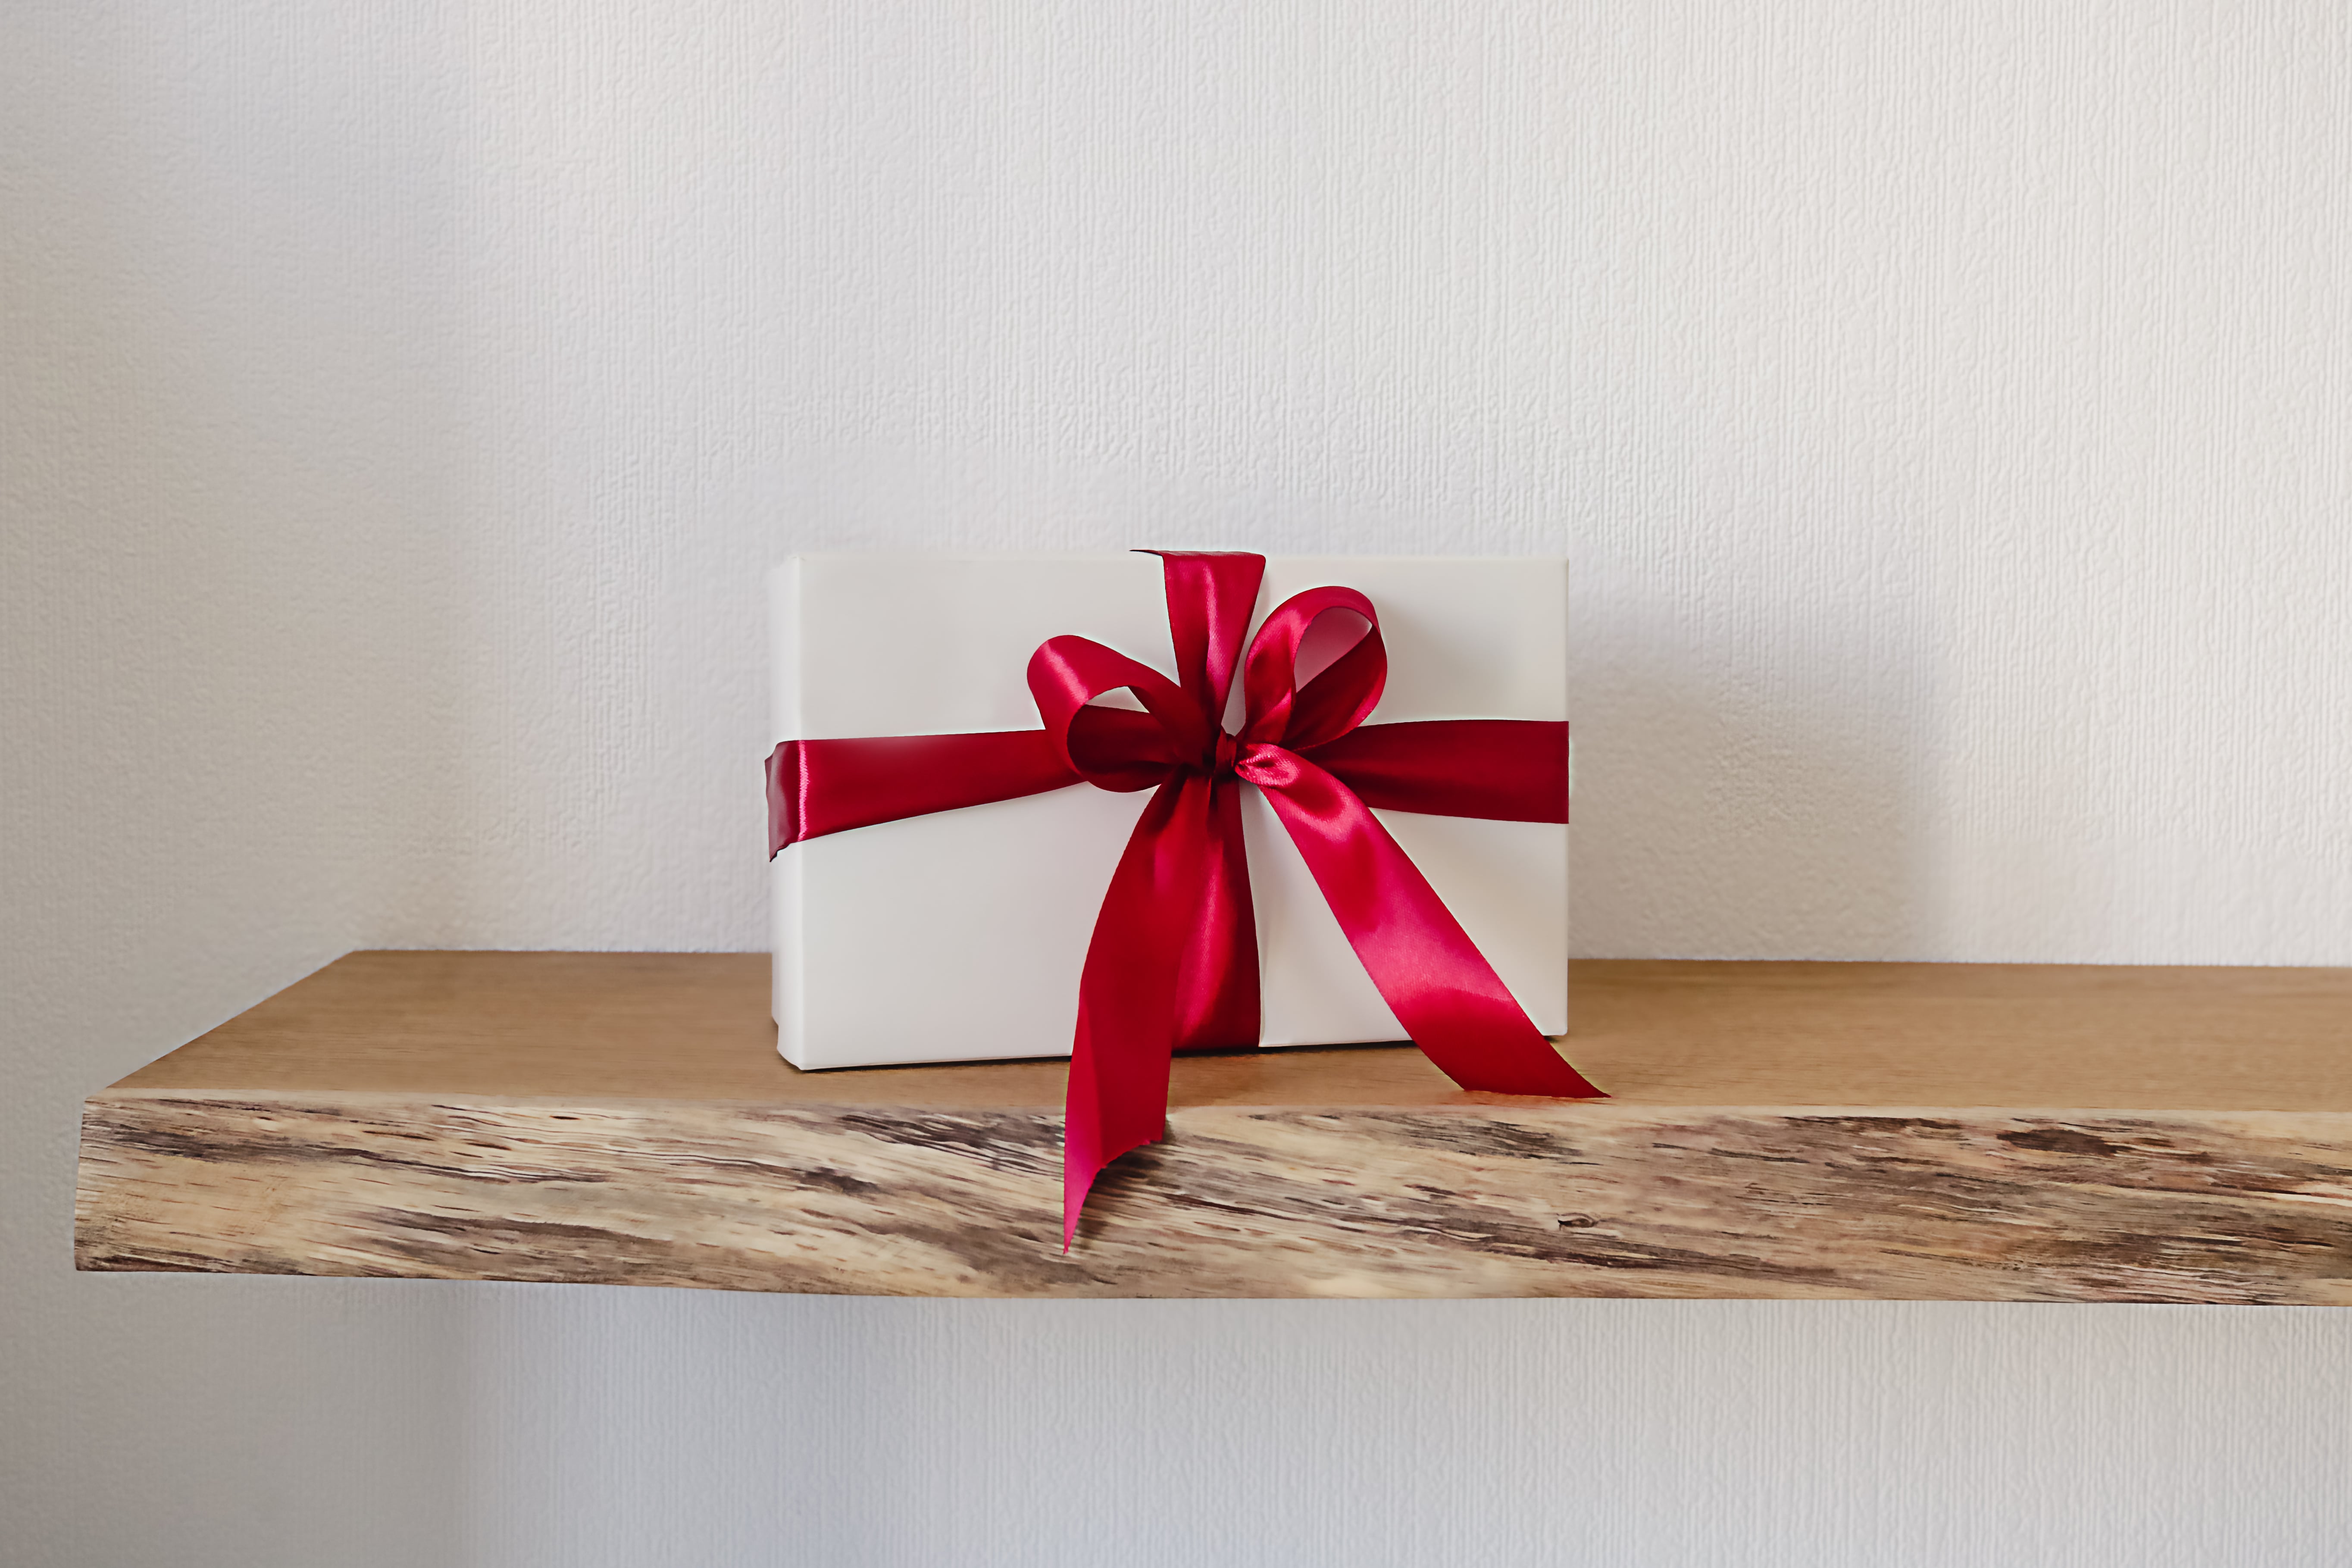 Small holiday gift box sitting on top of a wooden floating shelf